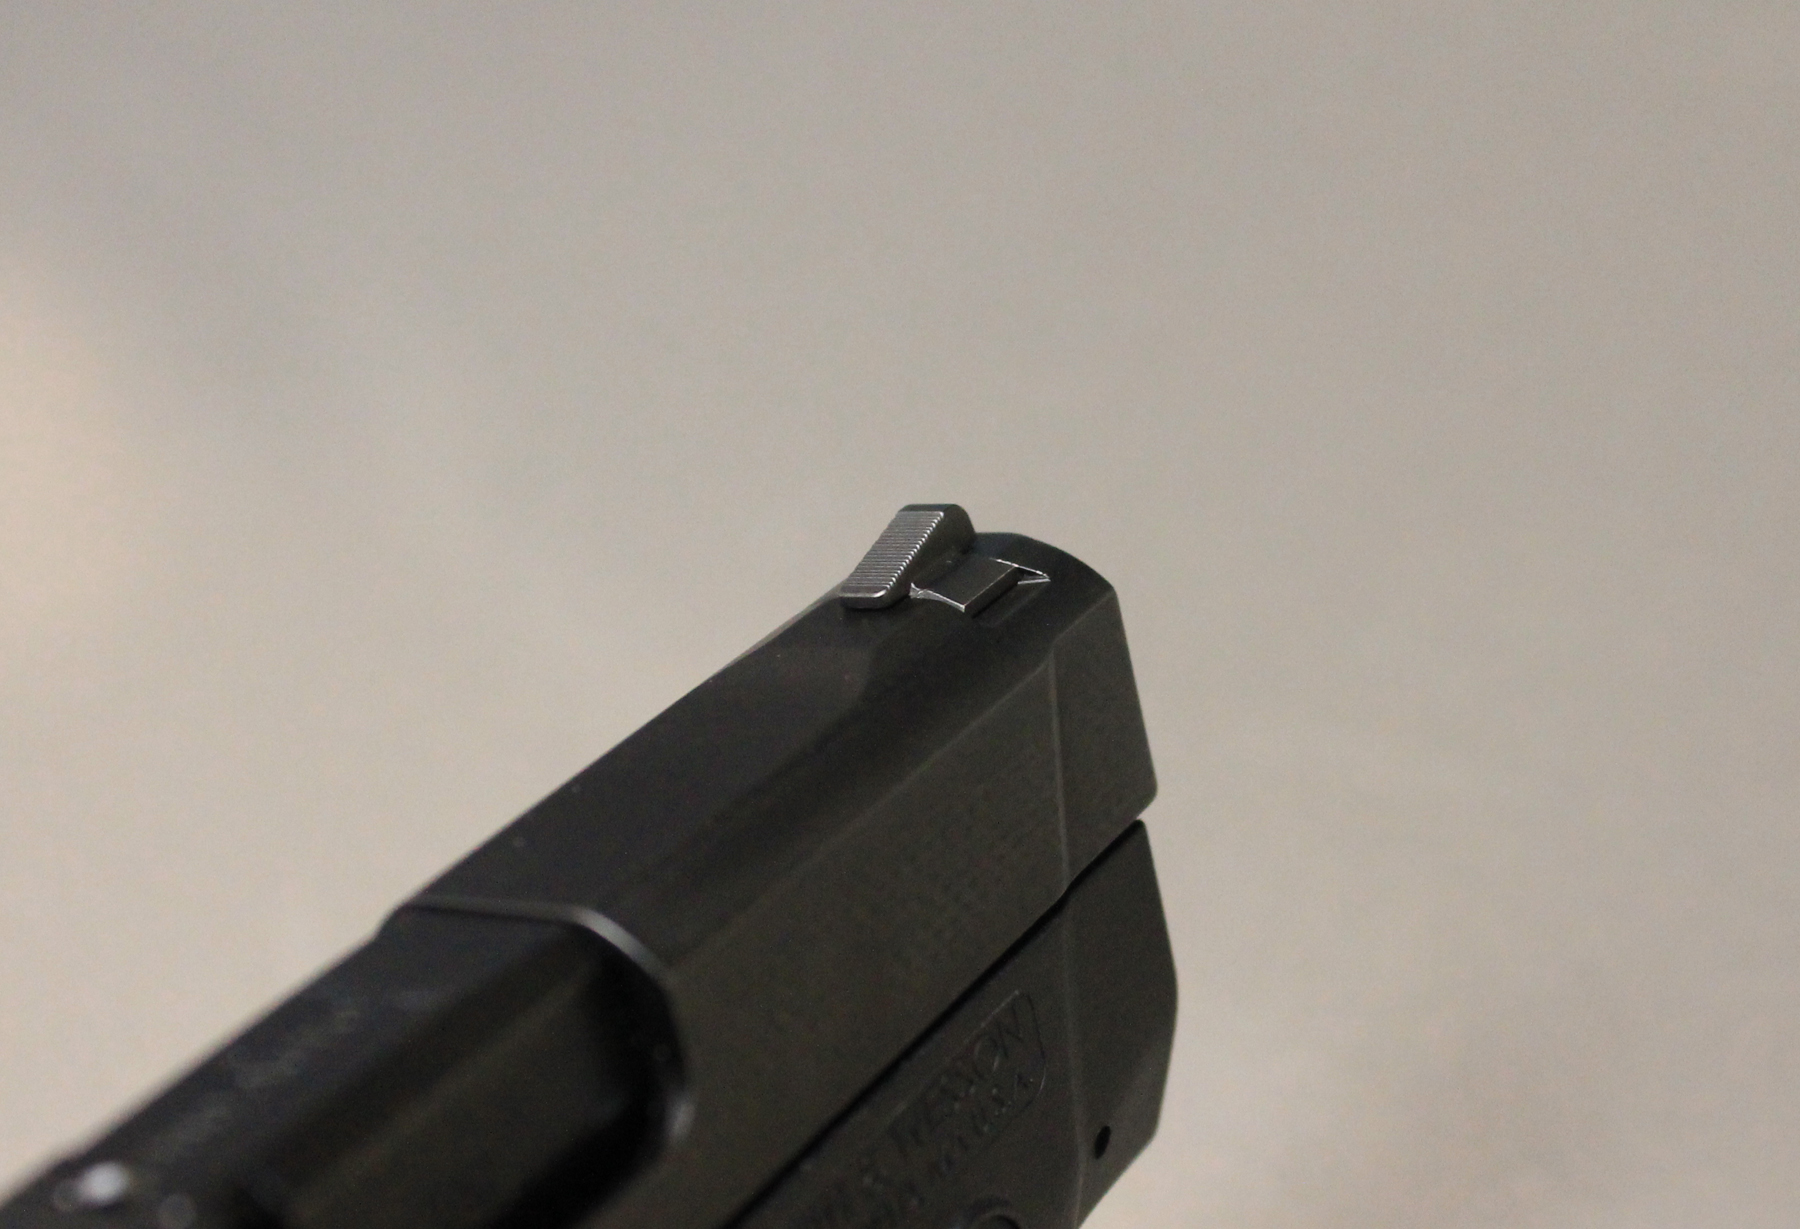 Smith & Wesson Bodyguard 380 stock ramp sight